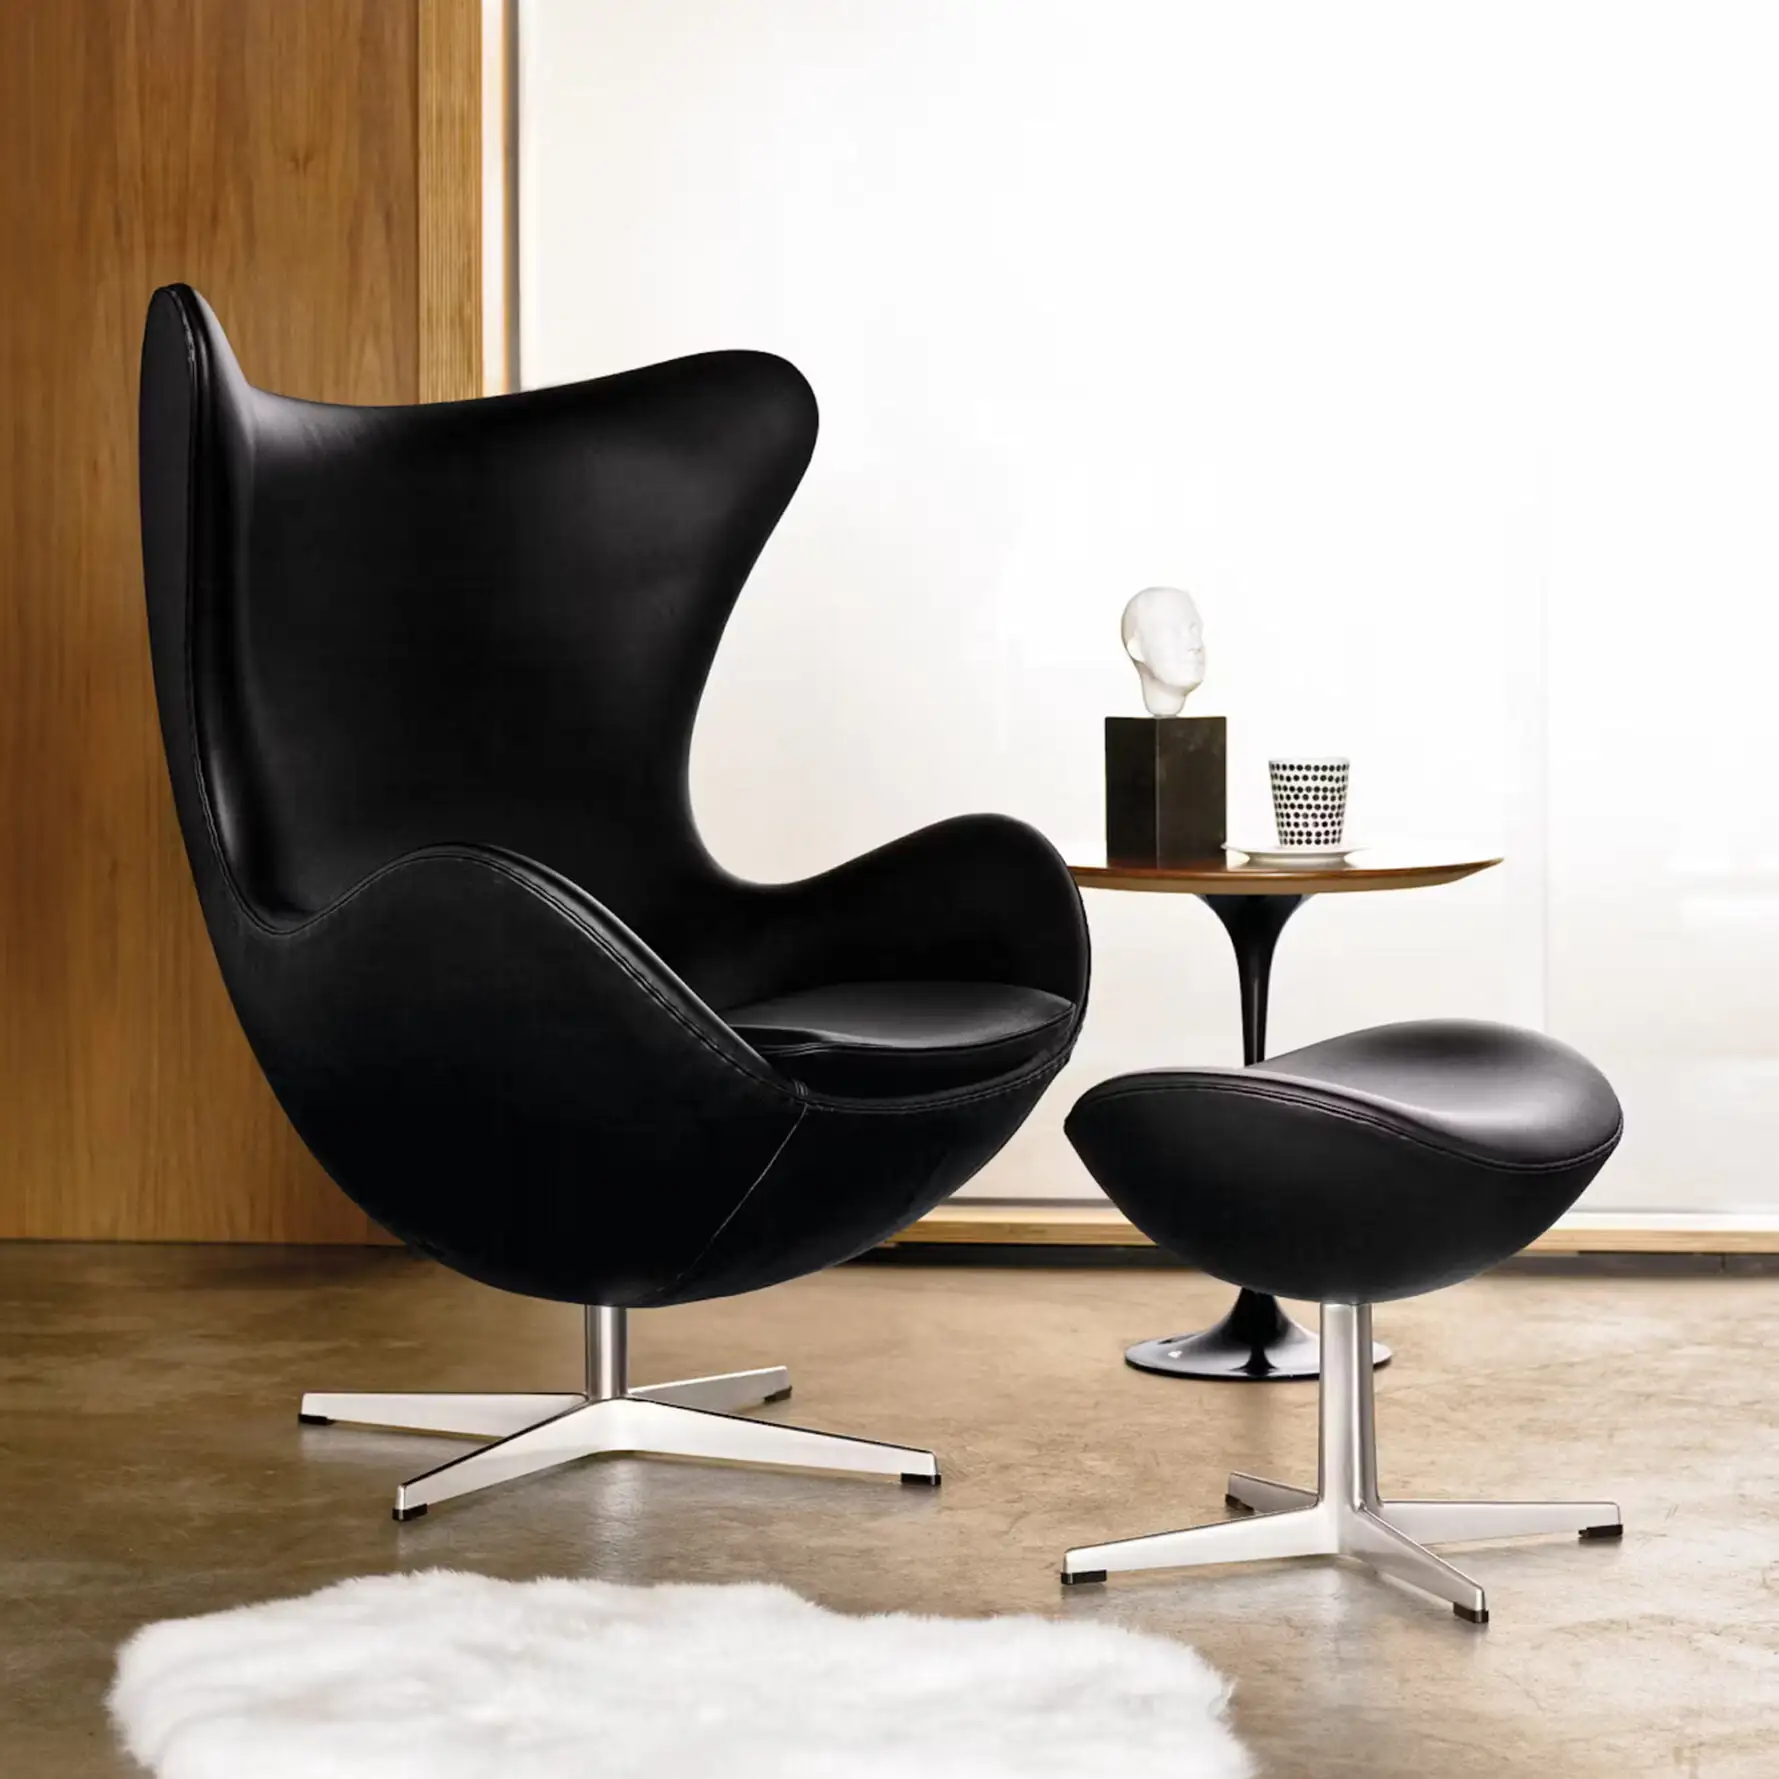 Image from: Sohnne.com - Egg Chair with Stool Black - Home Decor Ideas